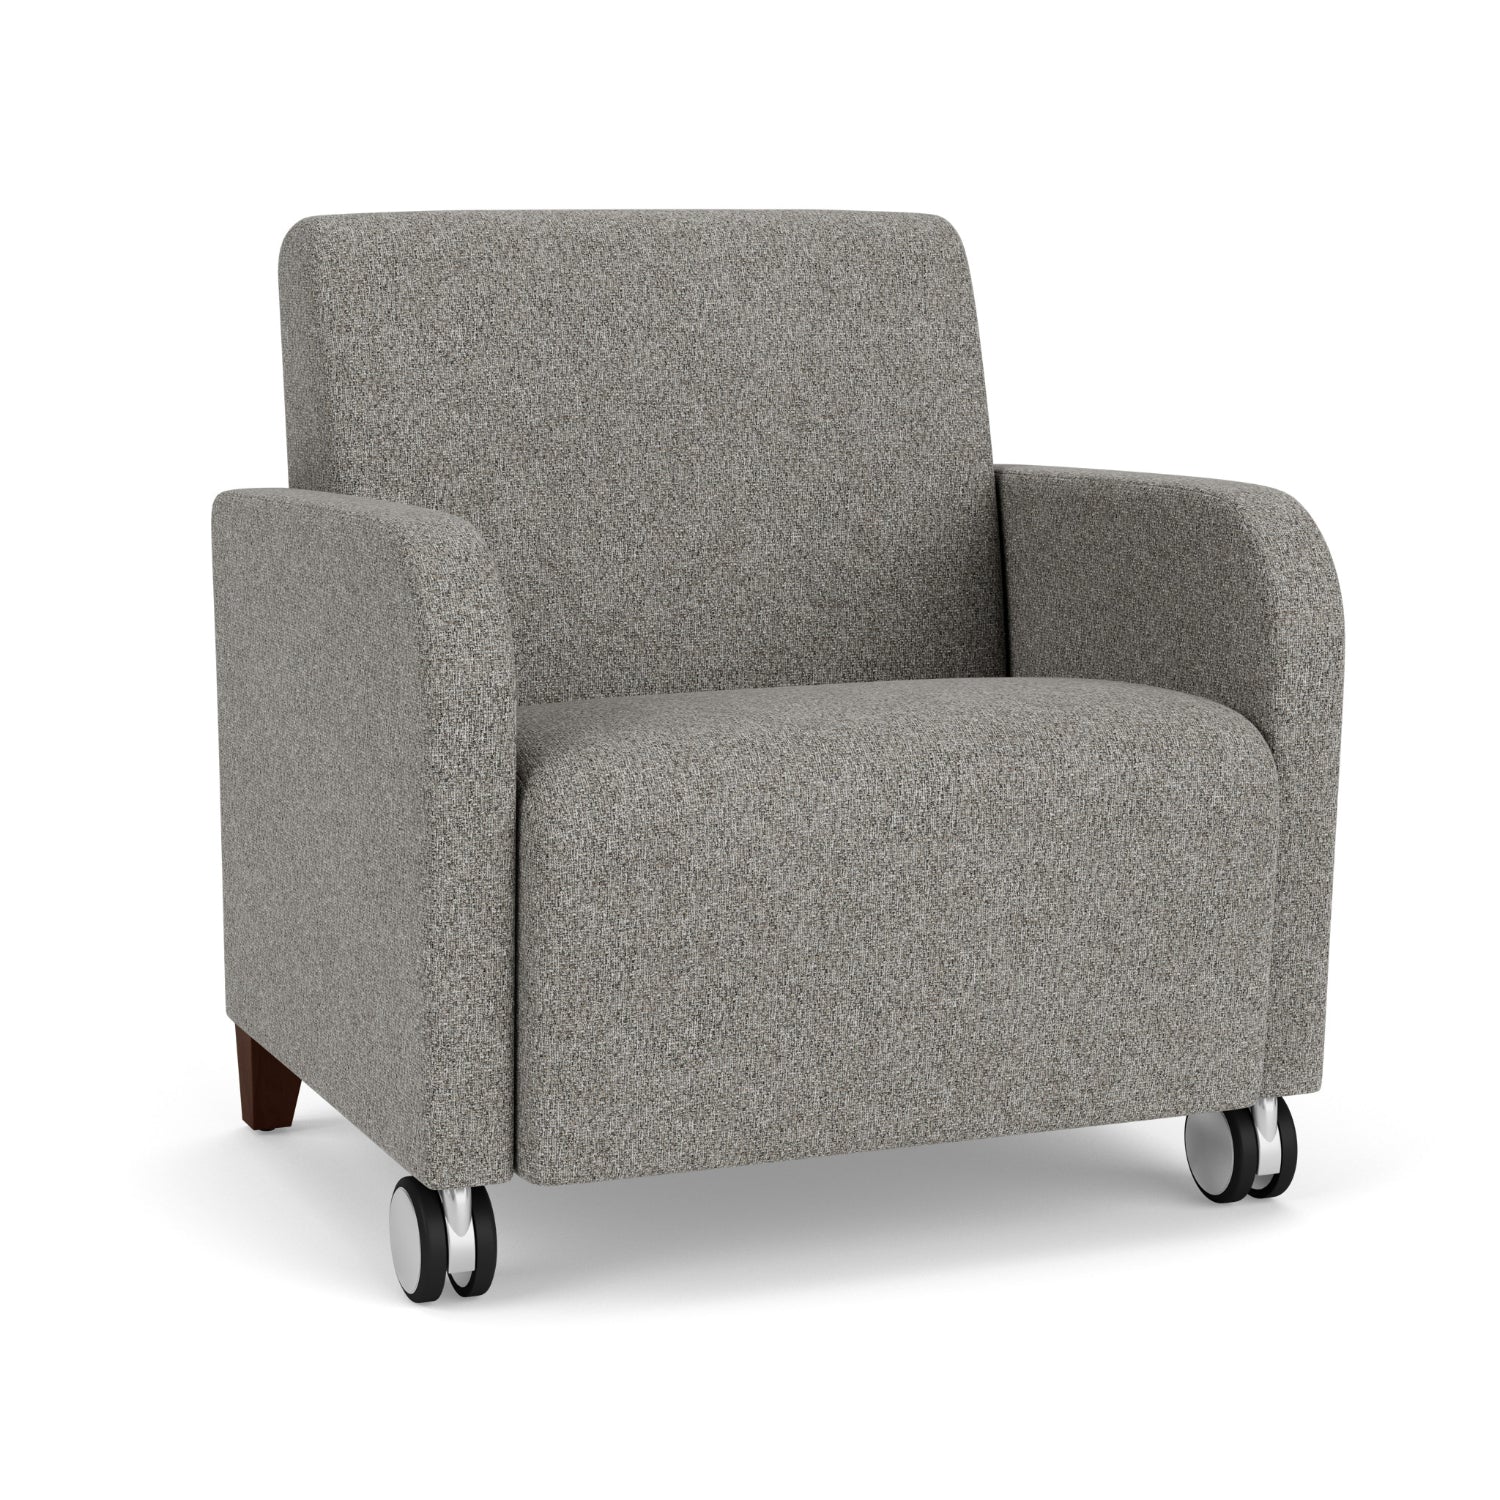 Siena Collection Reception Seating, Oversize Guest Chair with Front Casters, 500 lb. Capacity, Standard Fabric Upholstery, FREE SHIPPING